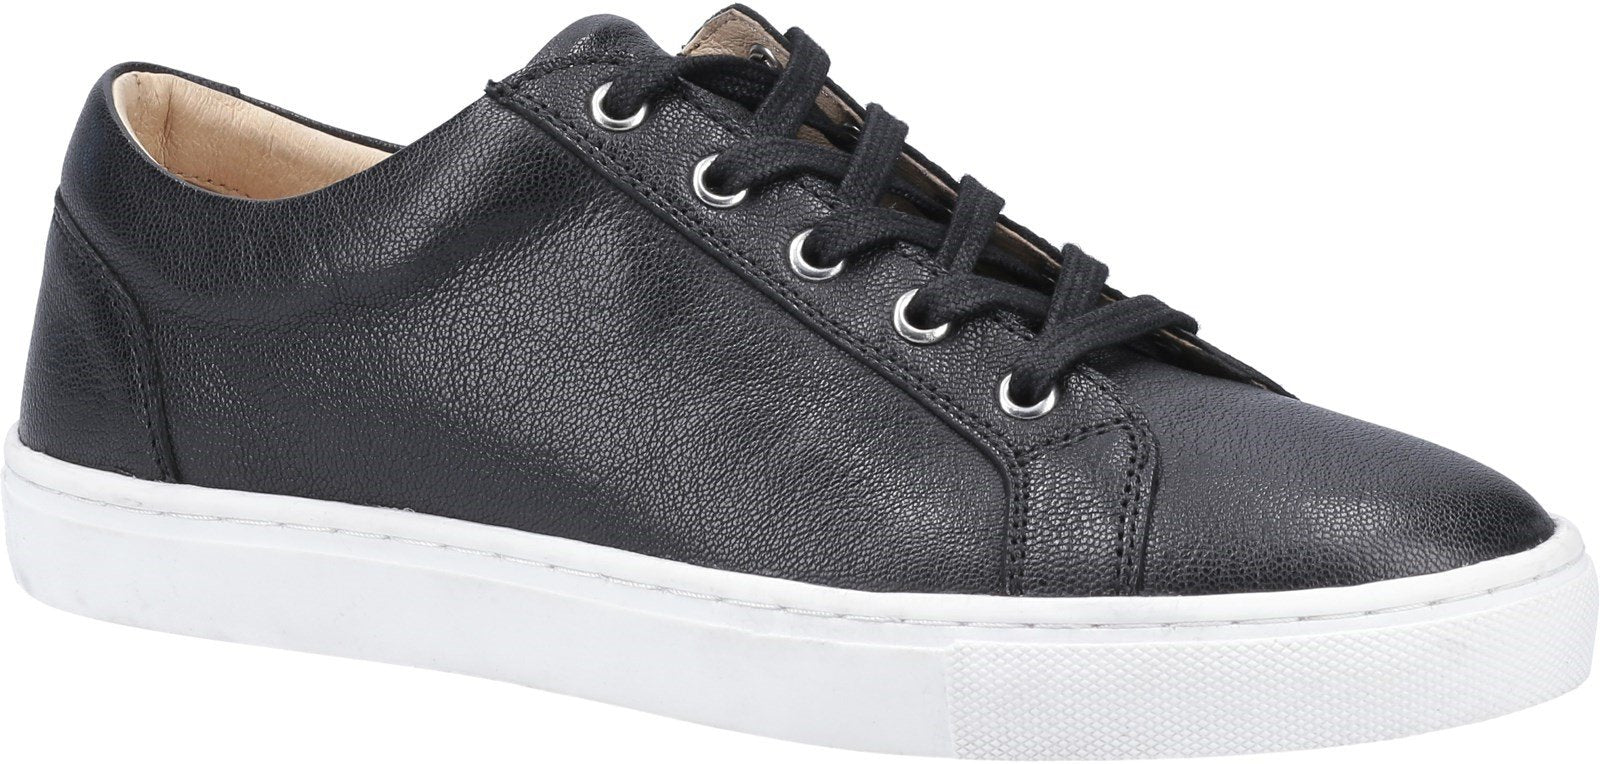 Hush Puppies Tessa black leather ladies lace up sneakers trainers shoes